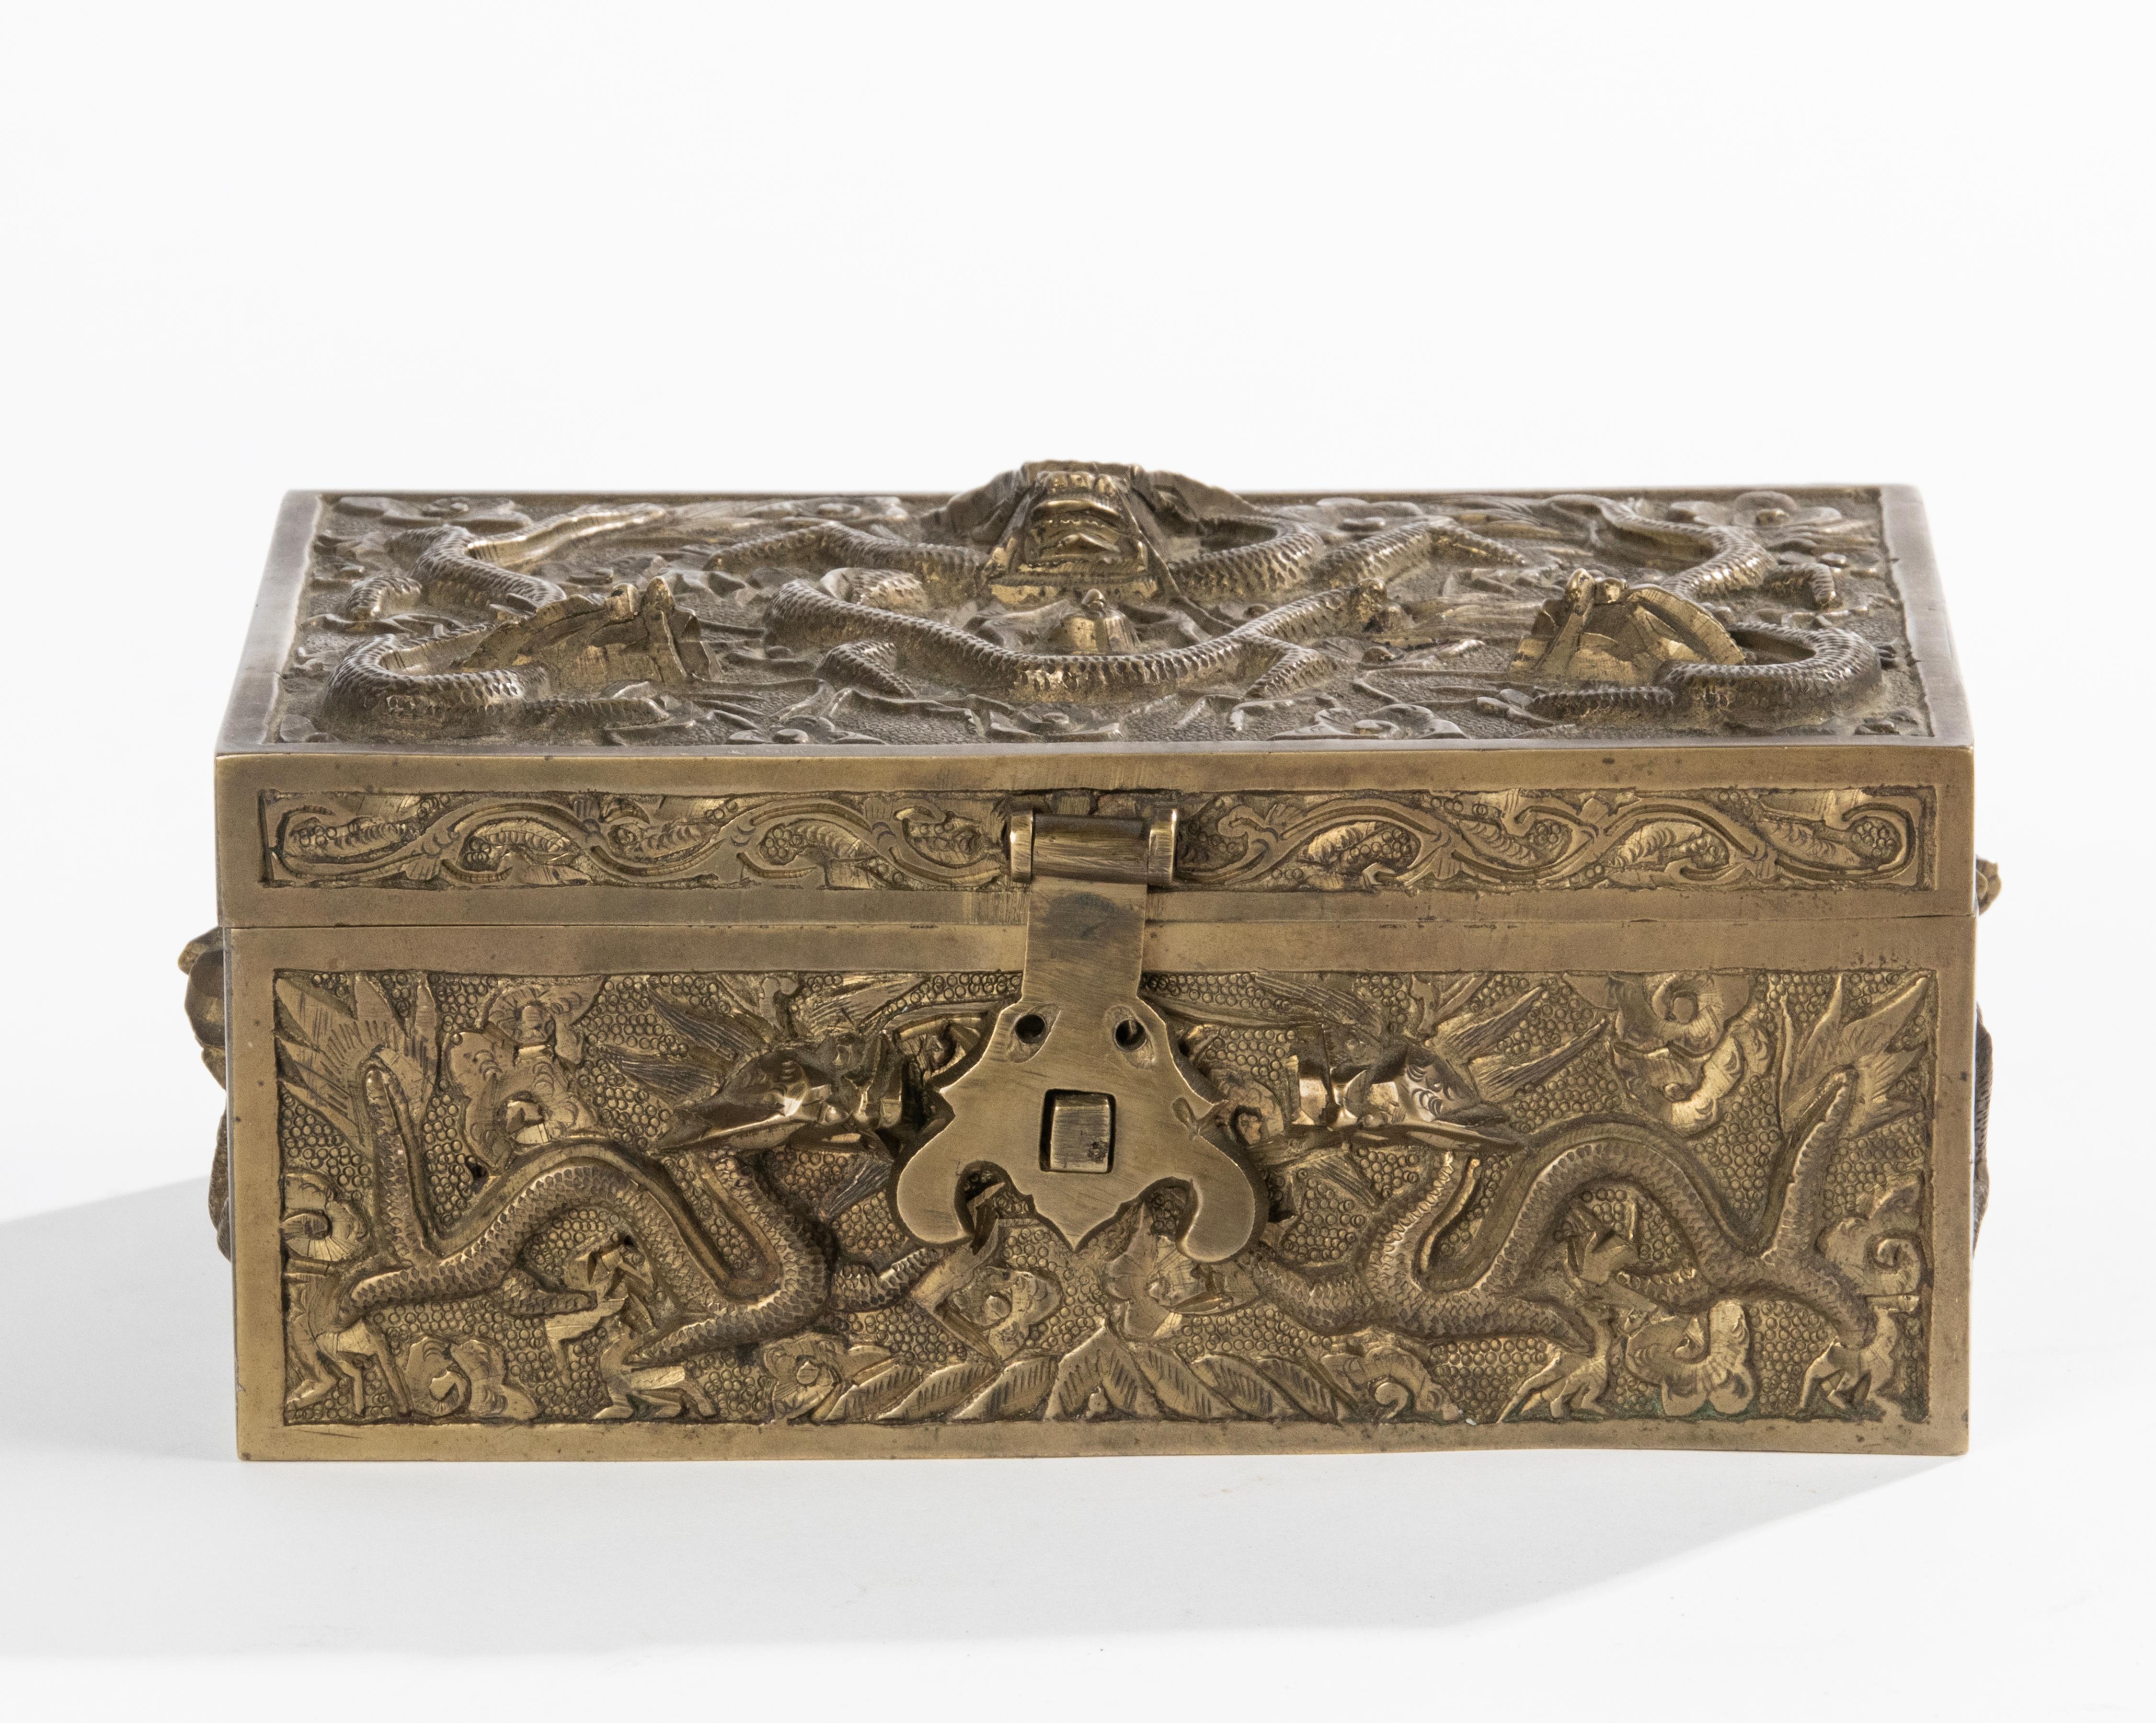 A beautiful copper casted box. Richly decorated with dragons and oriental motifs. The inside is covered with cedar wood, ideal for storage cigars. 
Dimensions: 8(h) x 18 x 12 cm 
The box is in good condition. Nice old patina. 
Free shipping worldwide